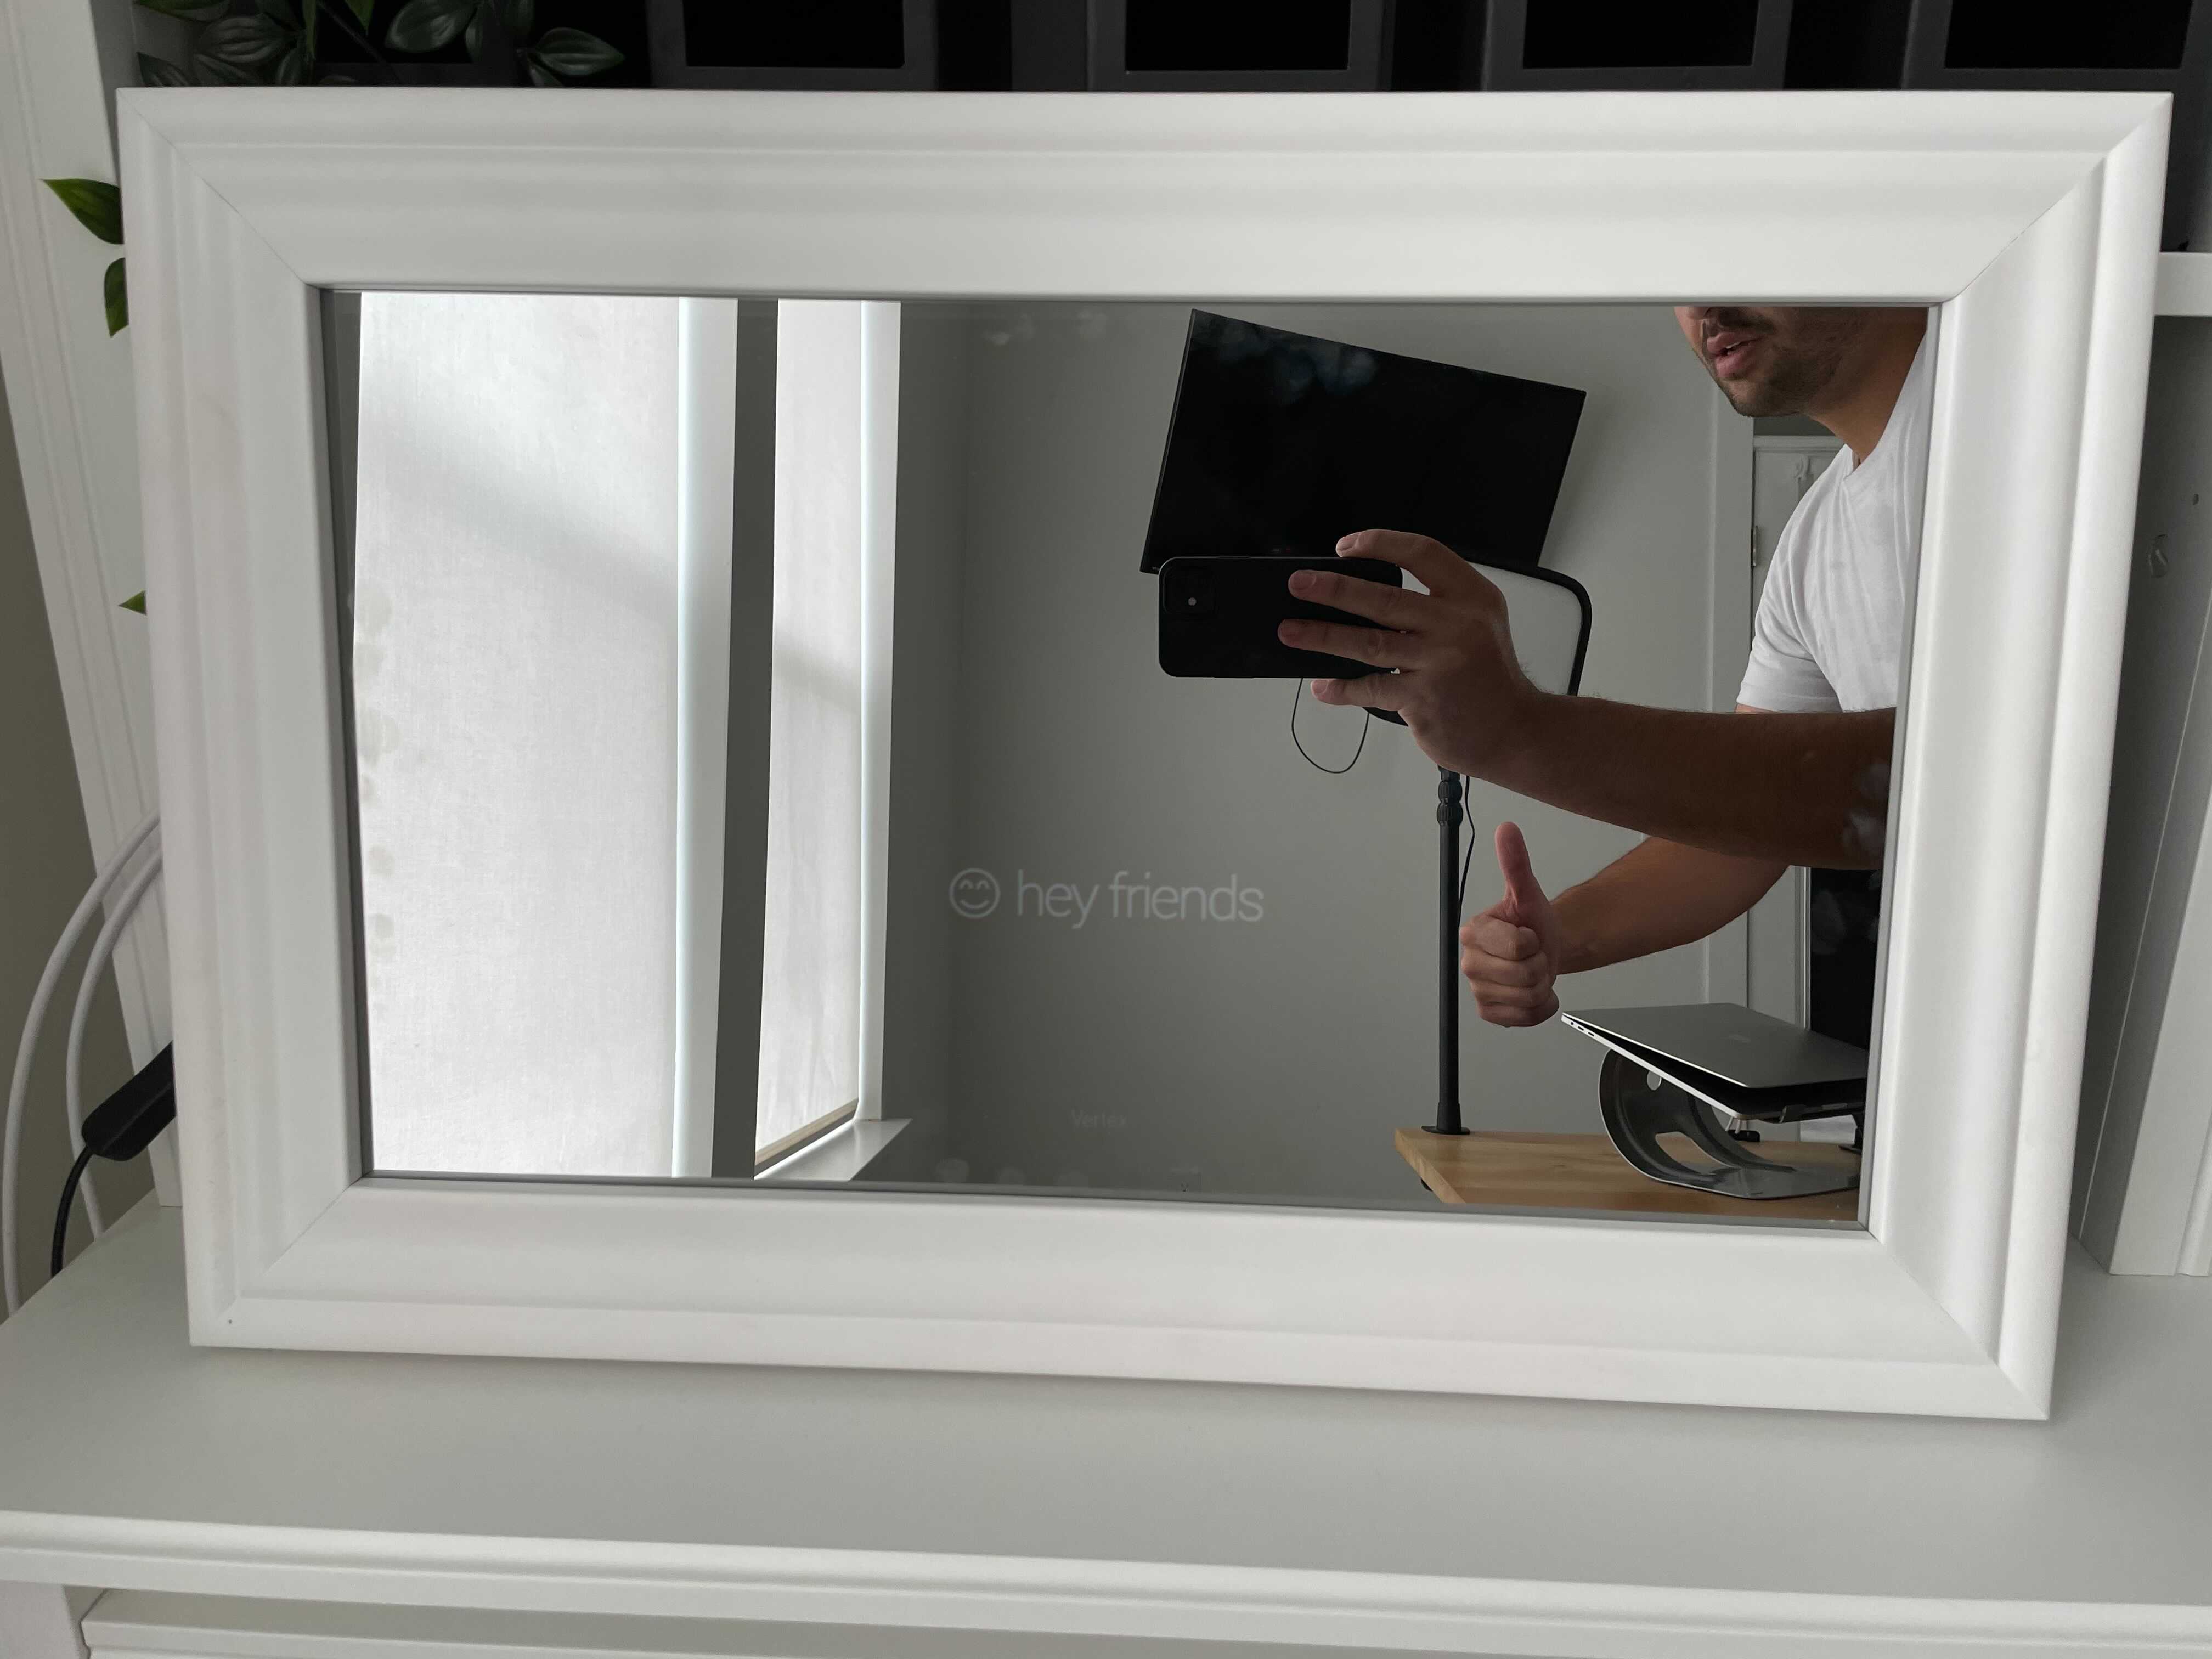 Picture of the working two way mirror